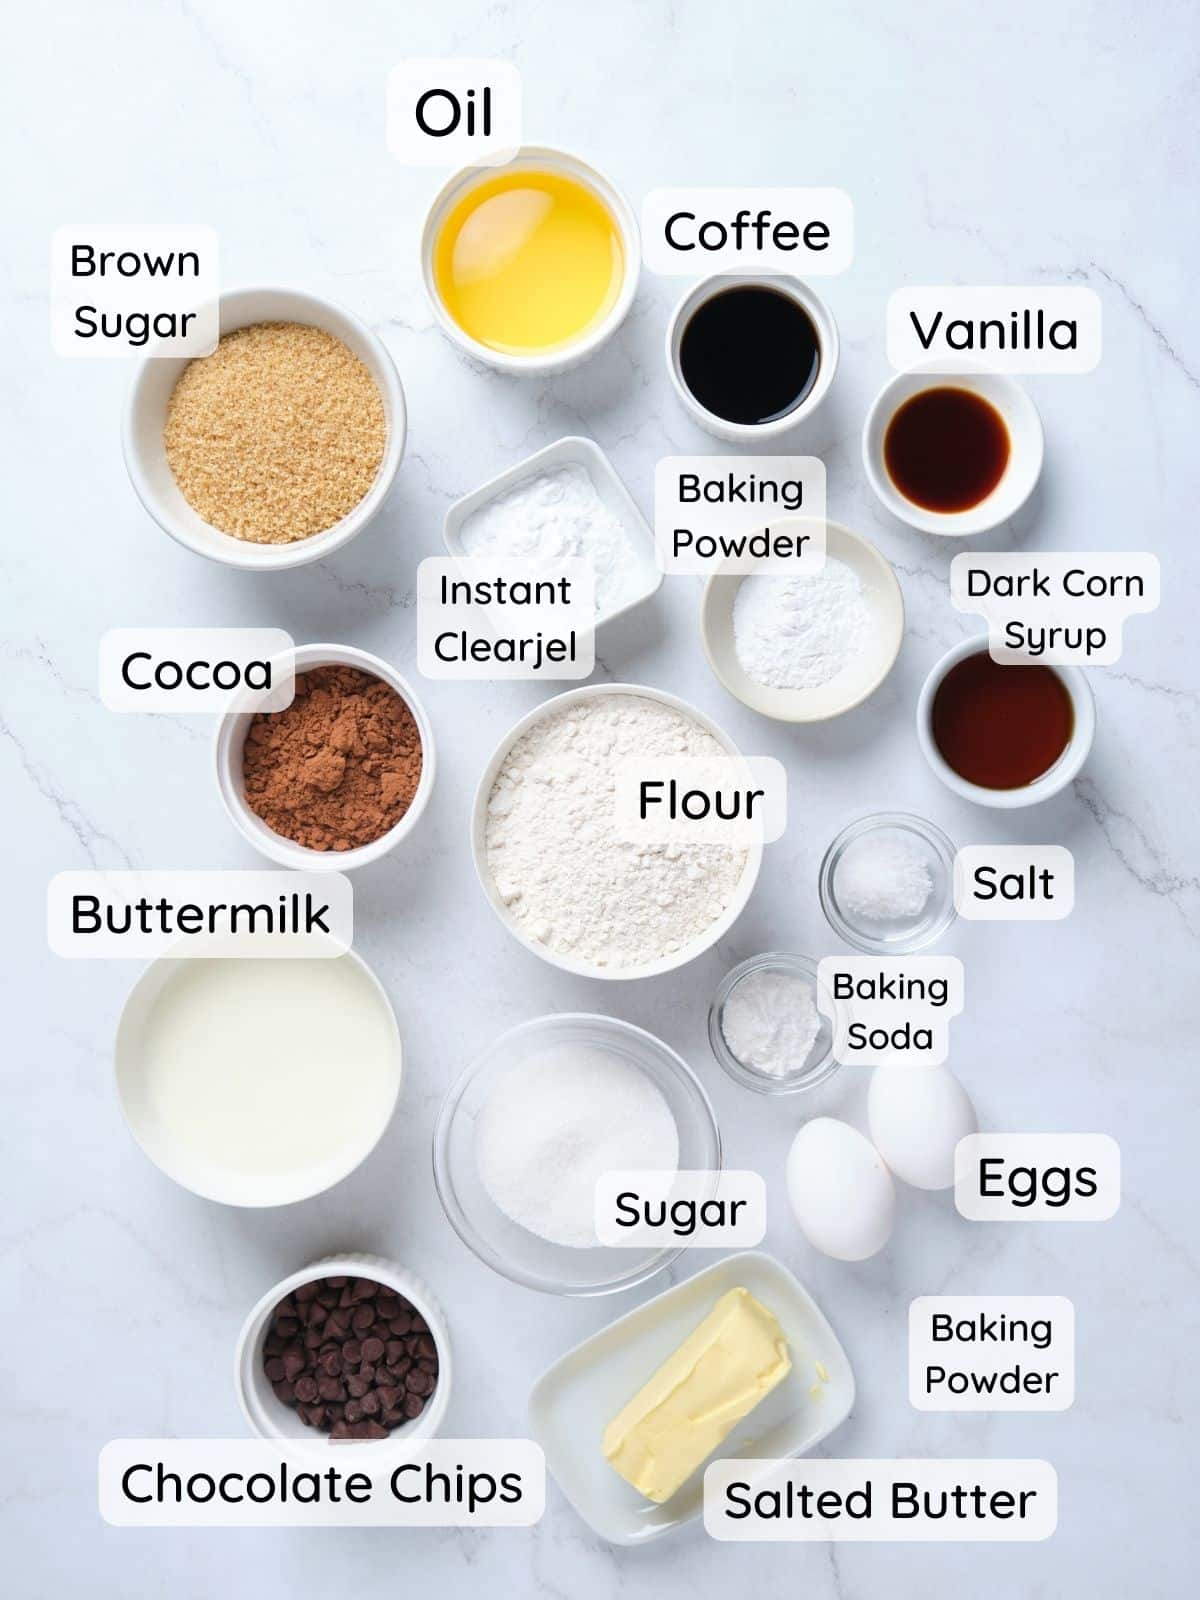 The chocolate fudge cake ingredients on a table with text overlay of "buttermilk, eggs, vanilla, dark corn syrup, butter, sugar, brown sugar, instant clearjel, baking powder, baking soda, salt, cocoa."